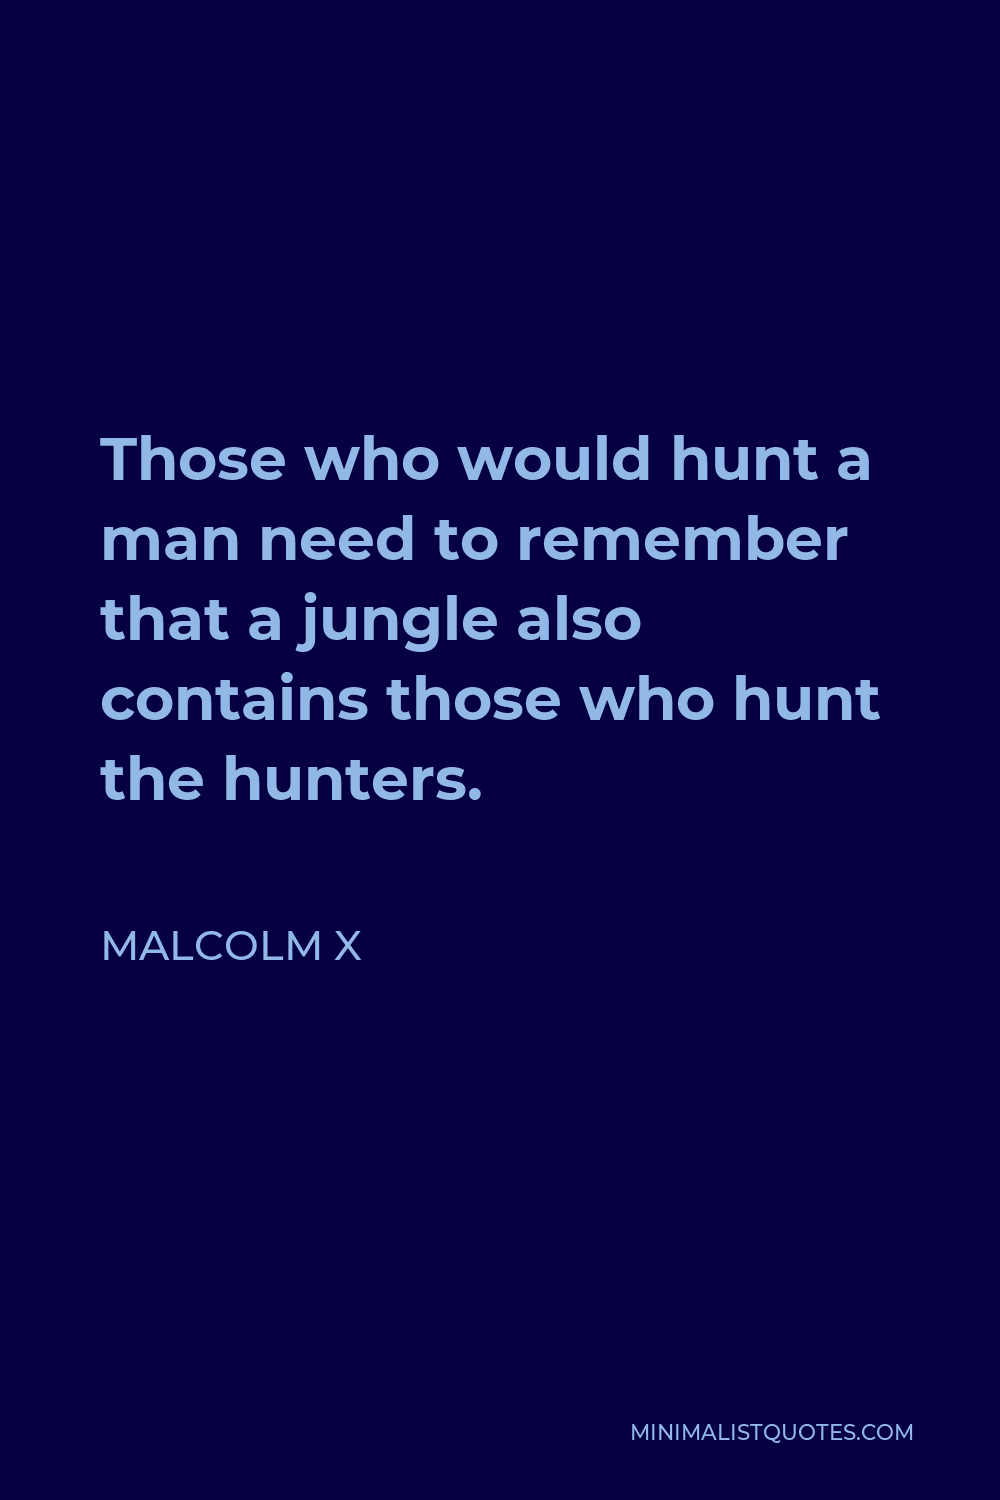 Malcolm X Quote - Those who would hunt a man need to remember that a jungle also contains those who hunt the hunters.